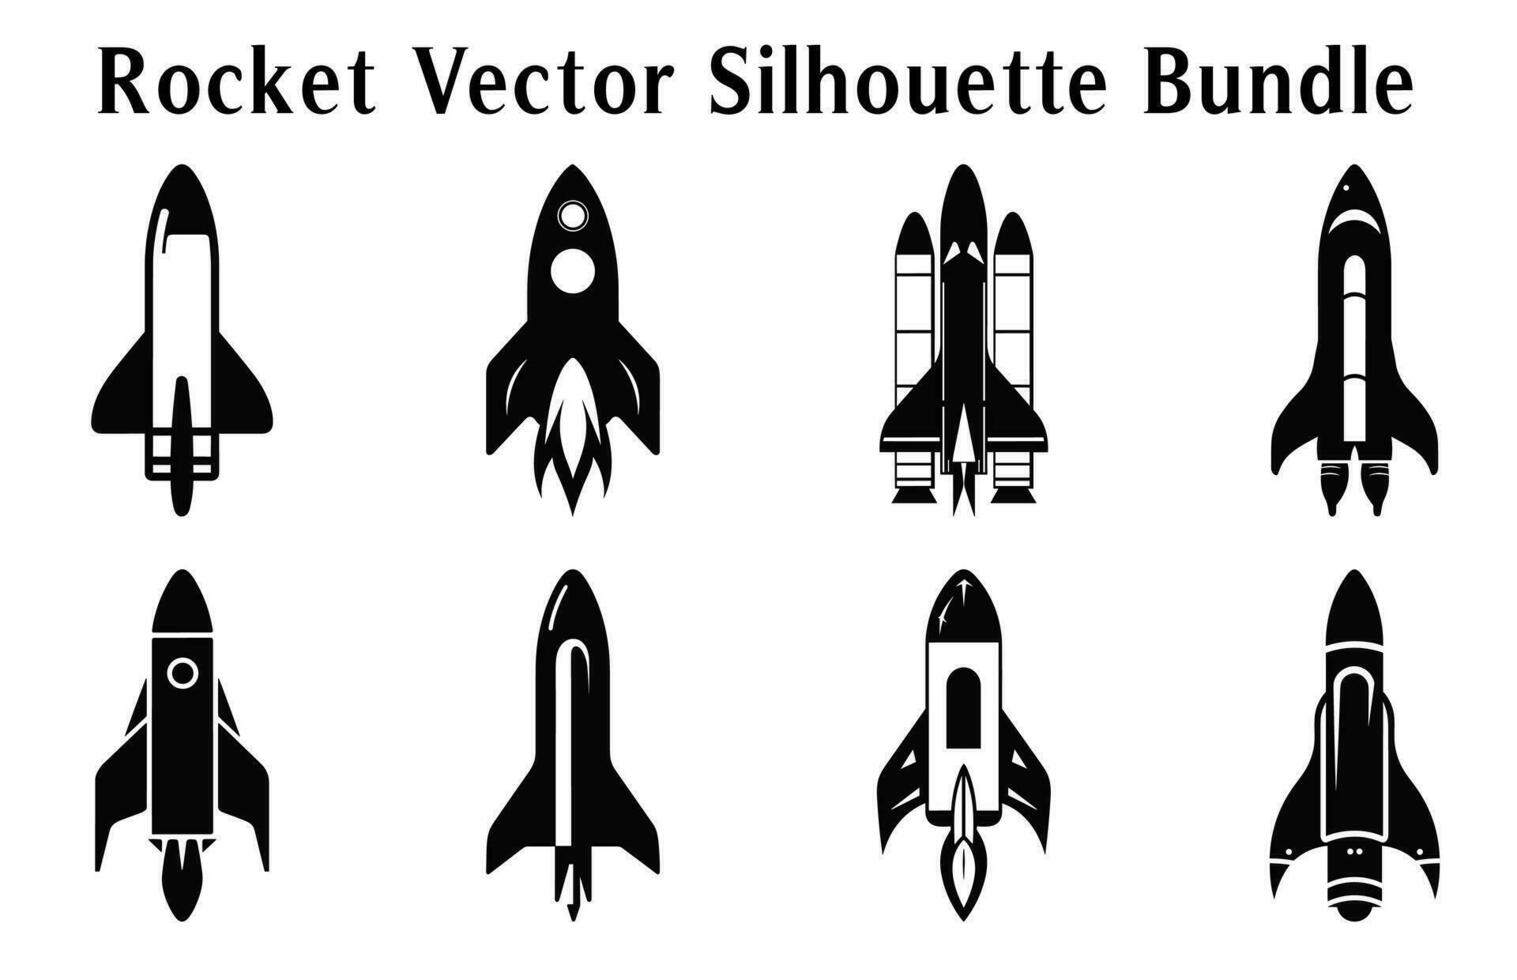 Rocket Silhouette Clipart Bundle, Set of Rocket icons vector, Launch spaceship and spacecraft Silhouettes vector